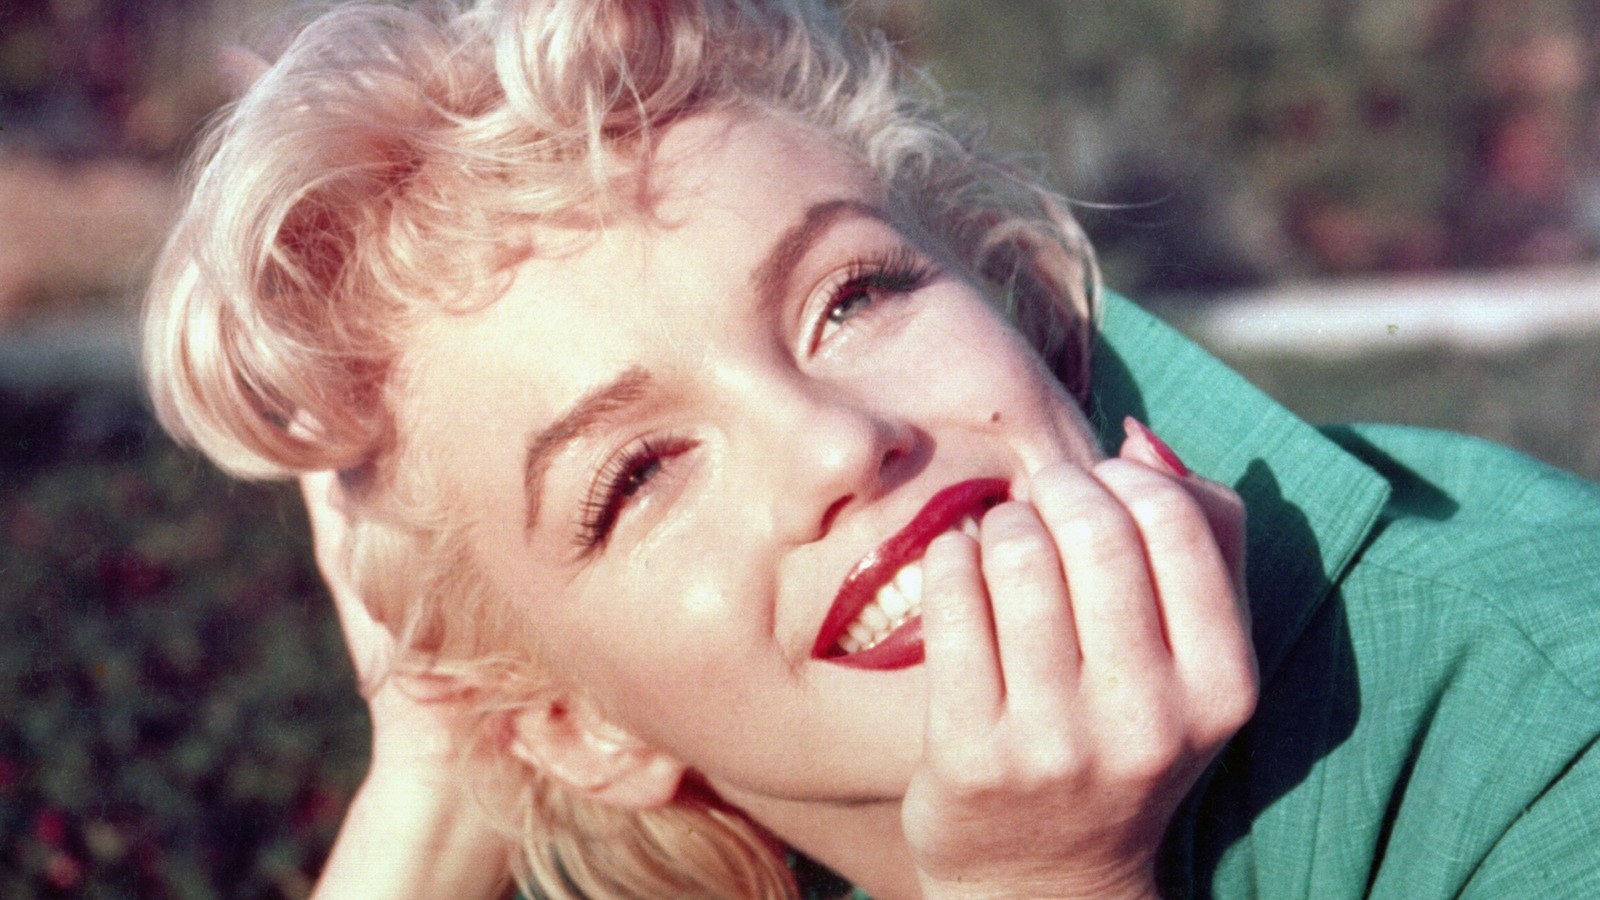 Marilyn Monroe Movies: 15 Greatest Films Ranked Worst to Best - GoldDerby